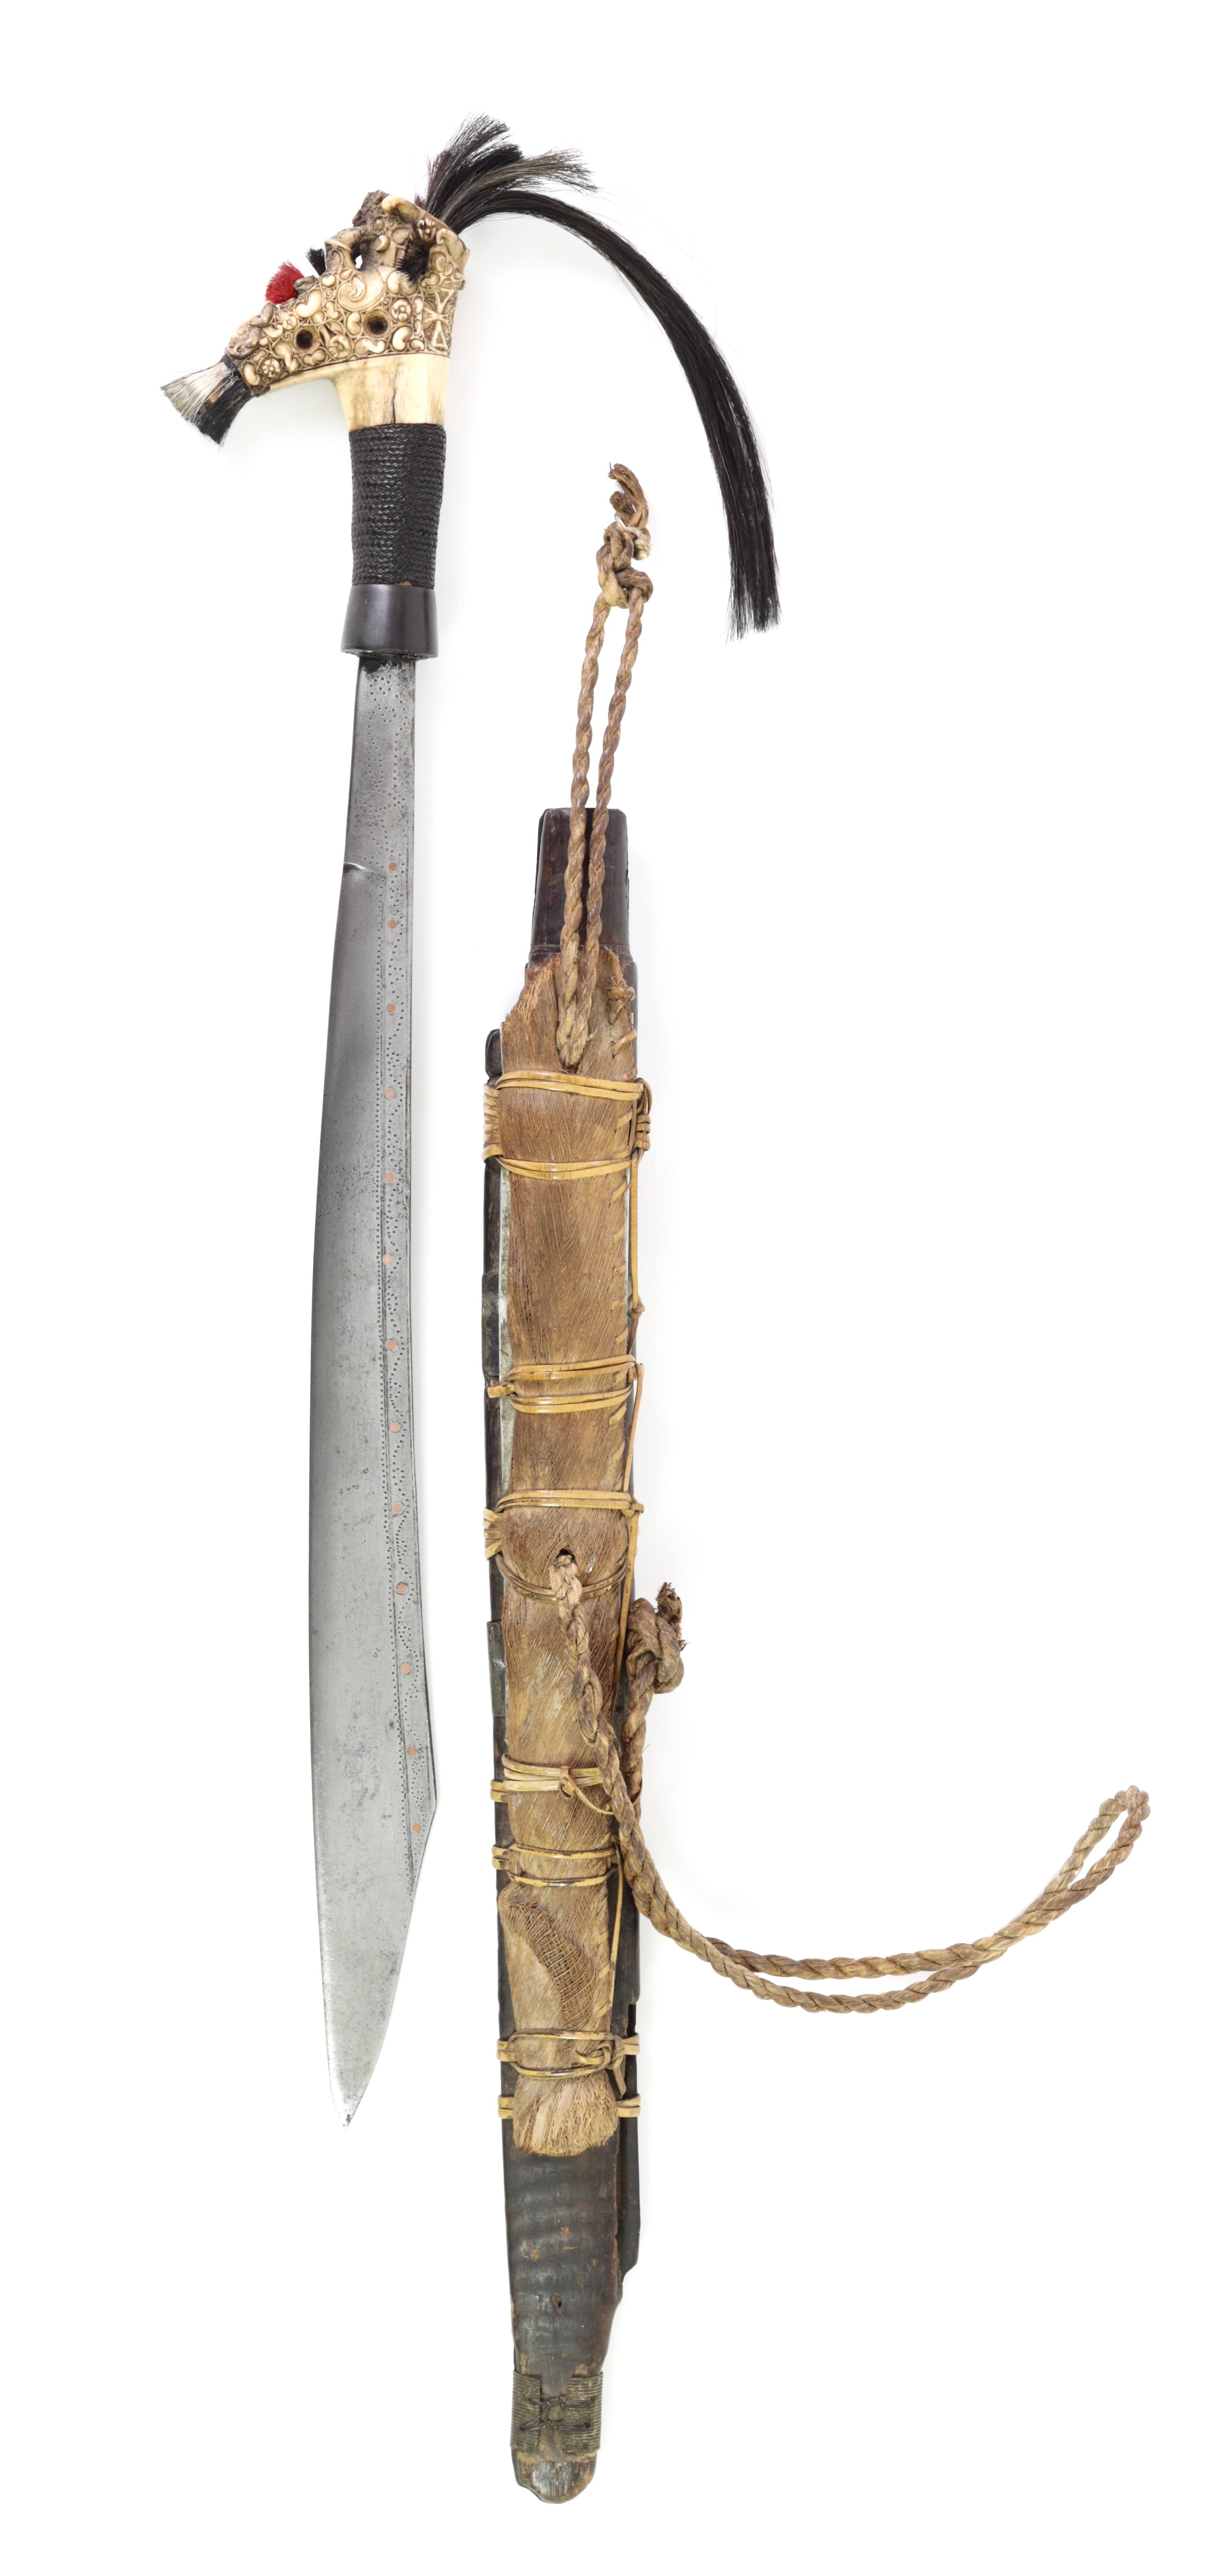 A fine Dayak headhunter sword with an exceptionally carved hilt.